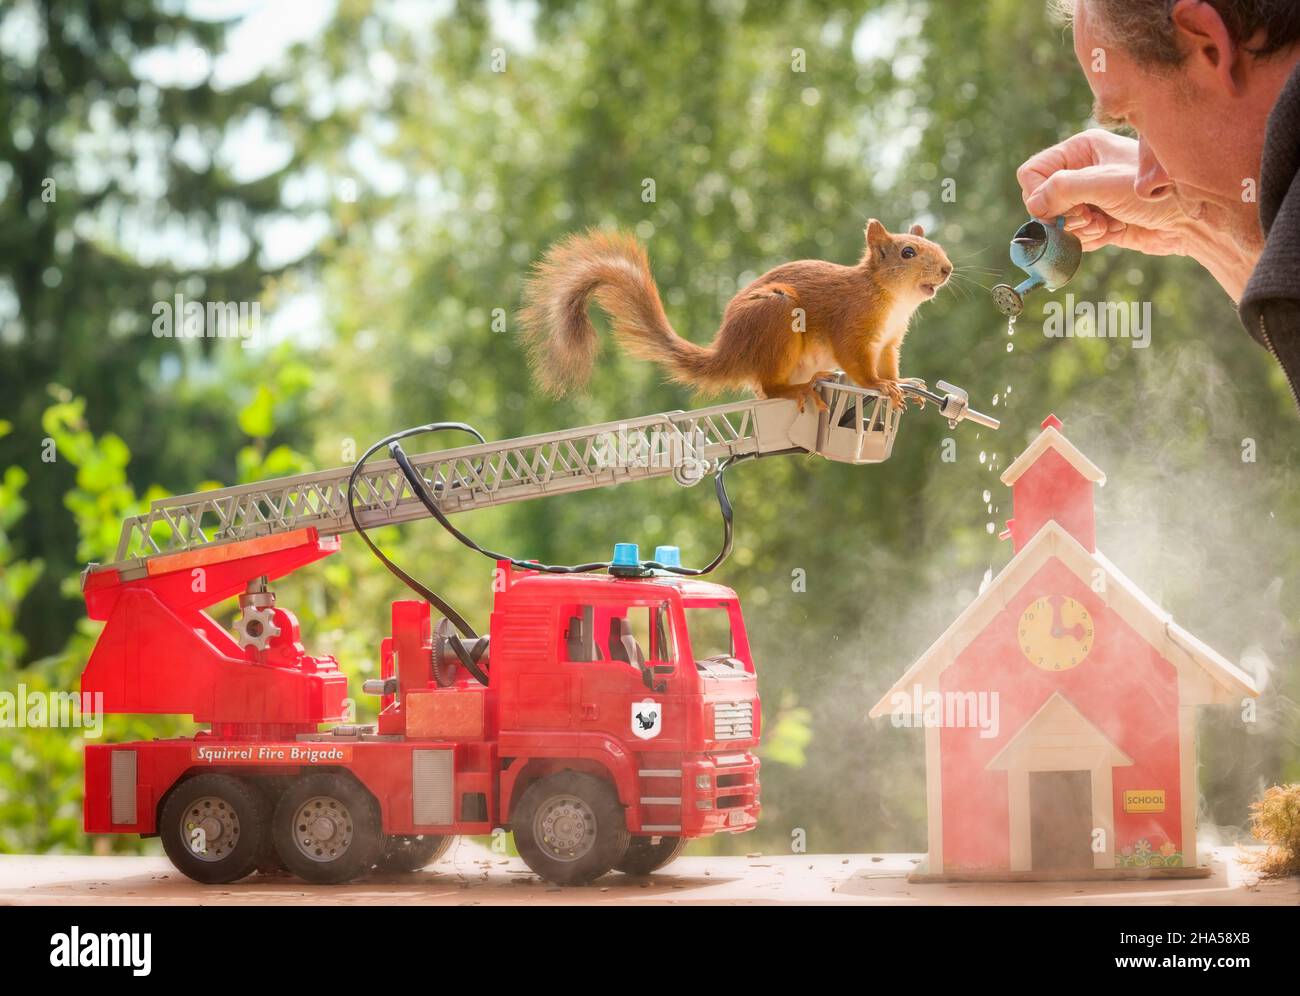 red squirrel and man with a fire brigade truck Stock Photo